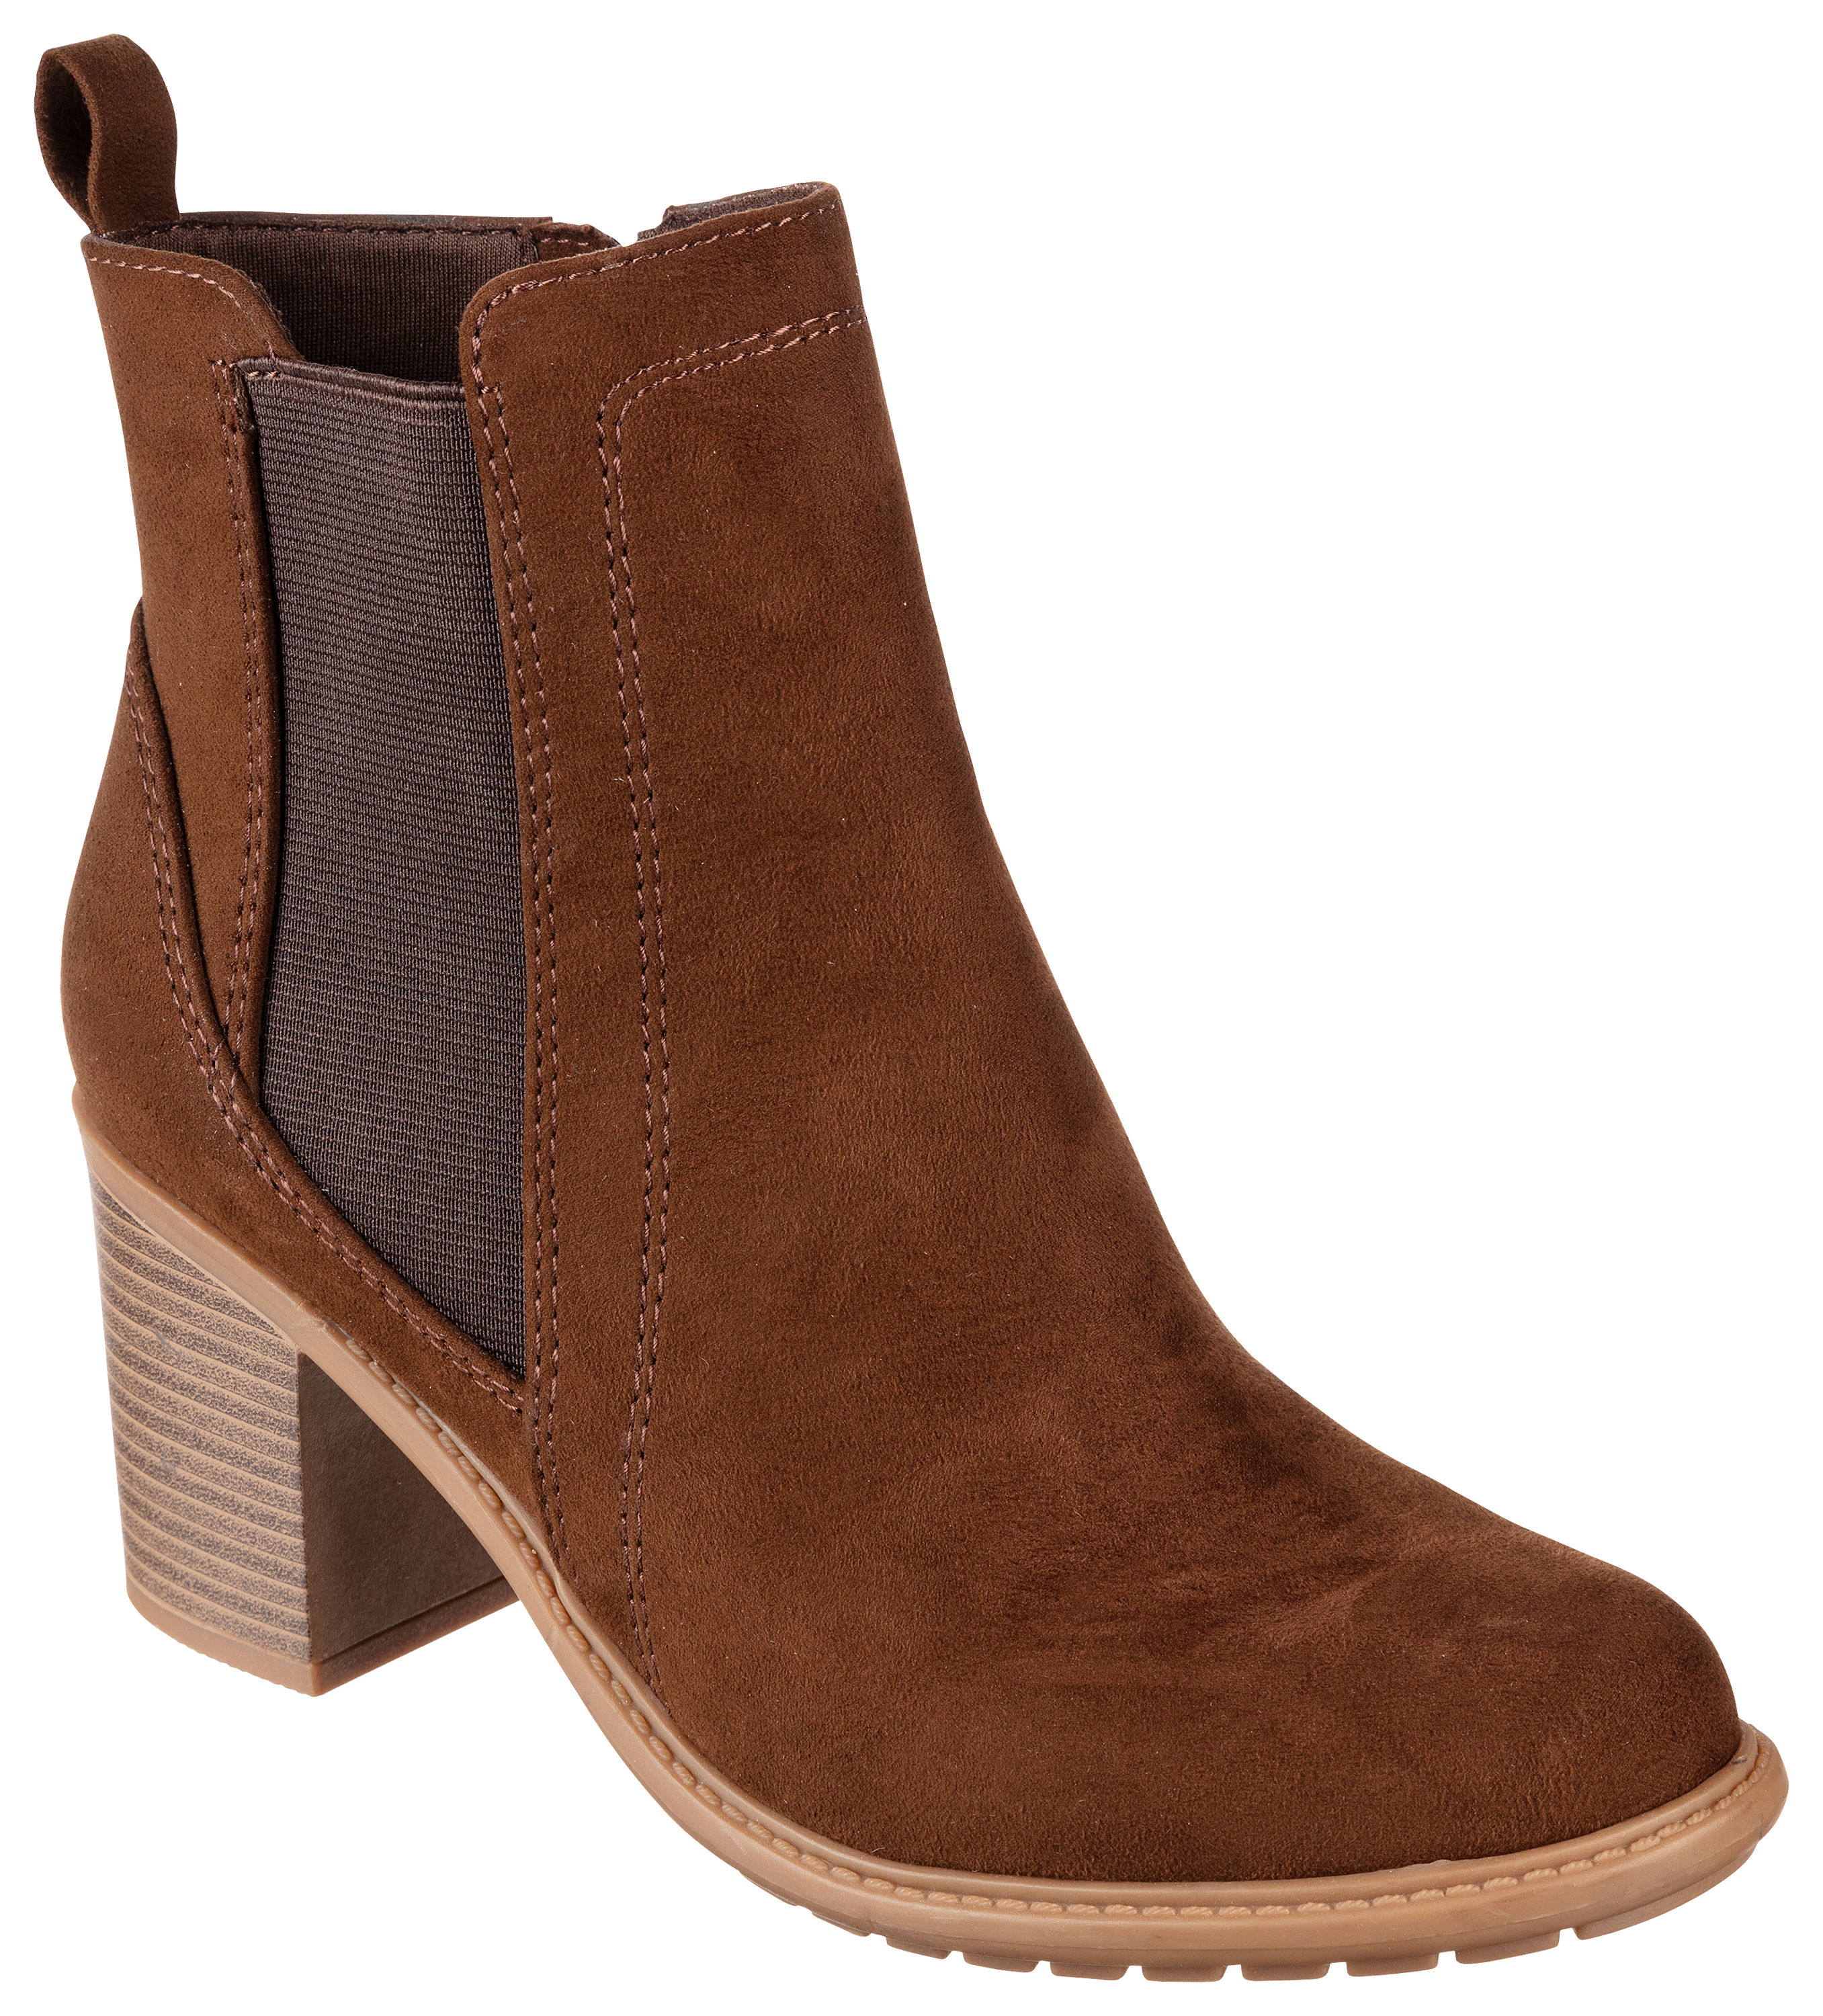 Natural Reflections Natalie II Boots for Ladies - Brown - 6M